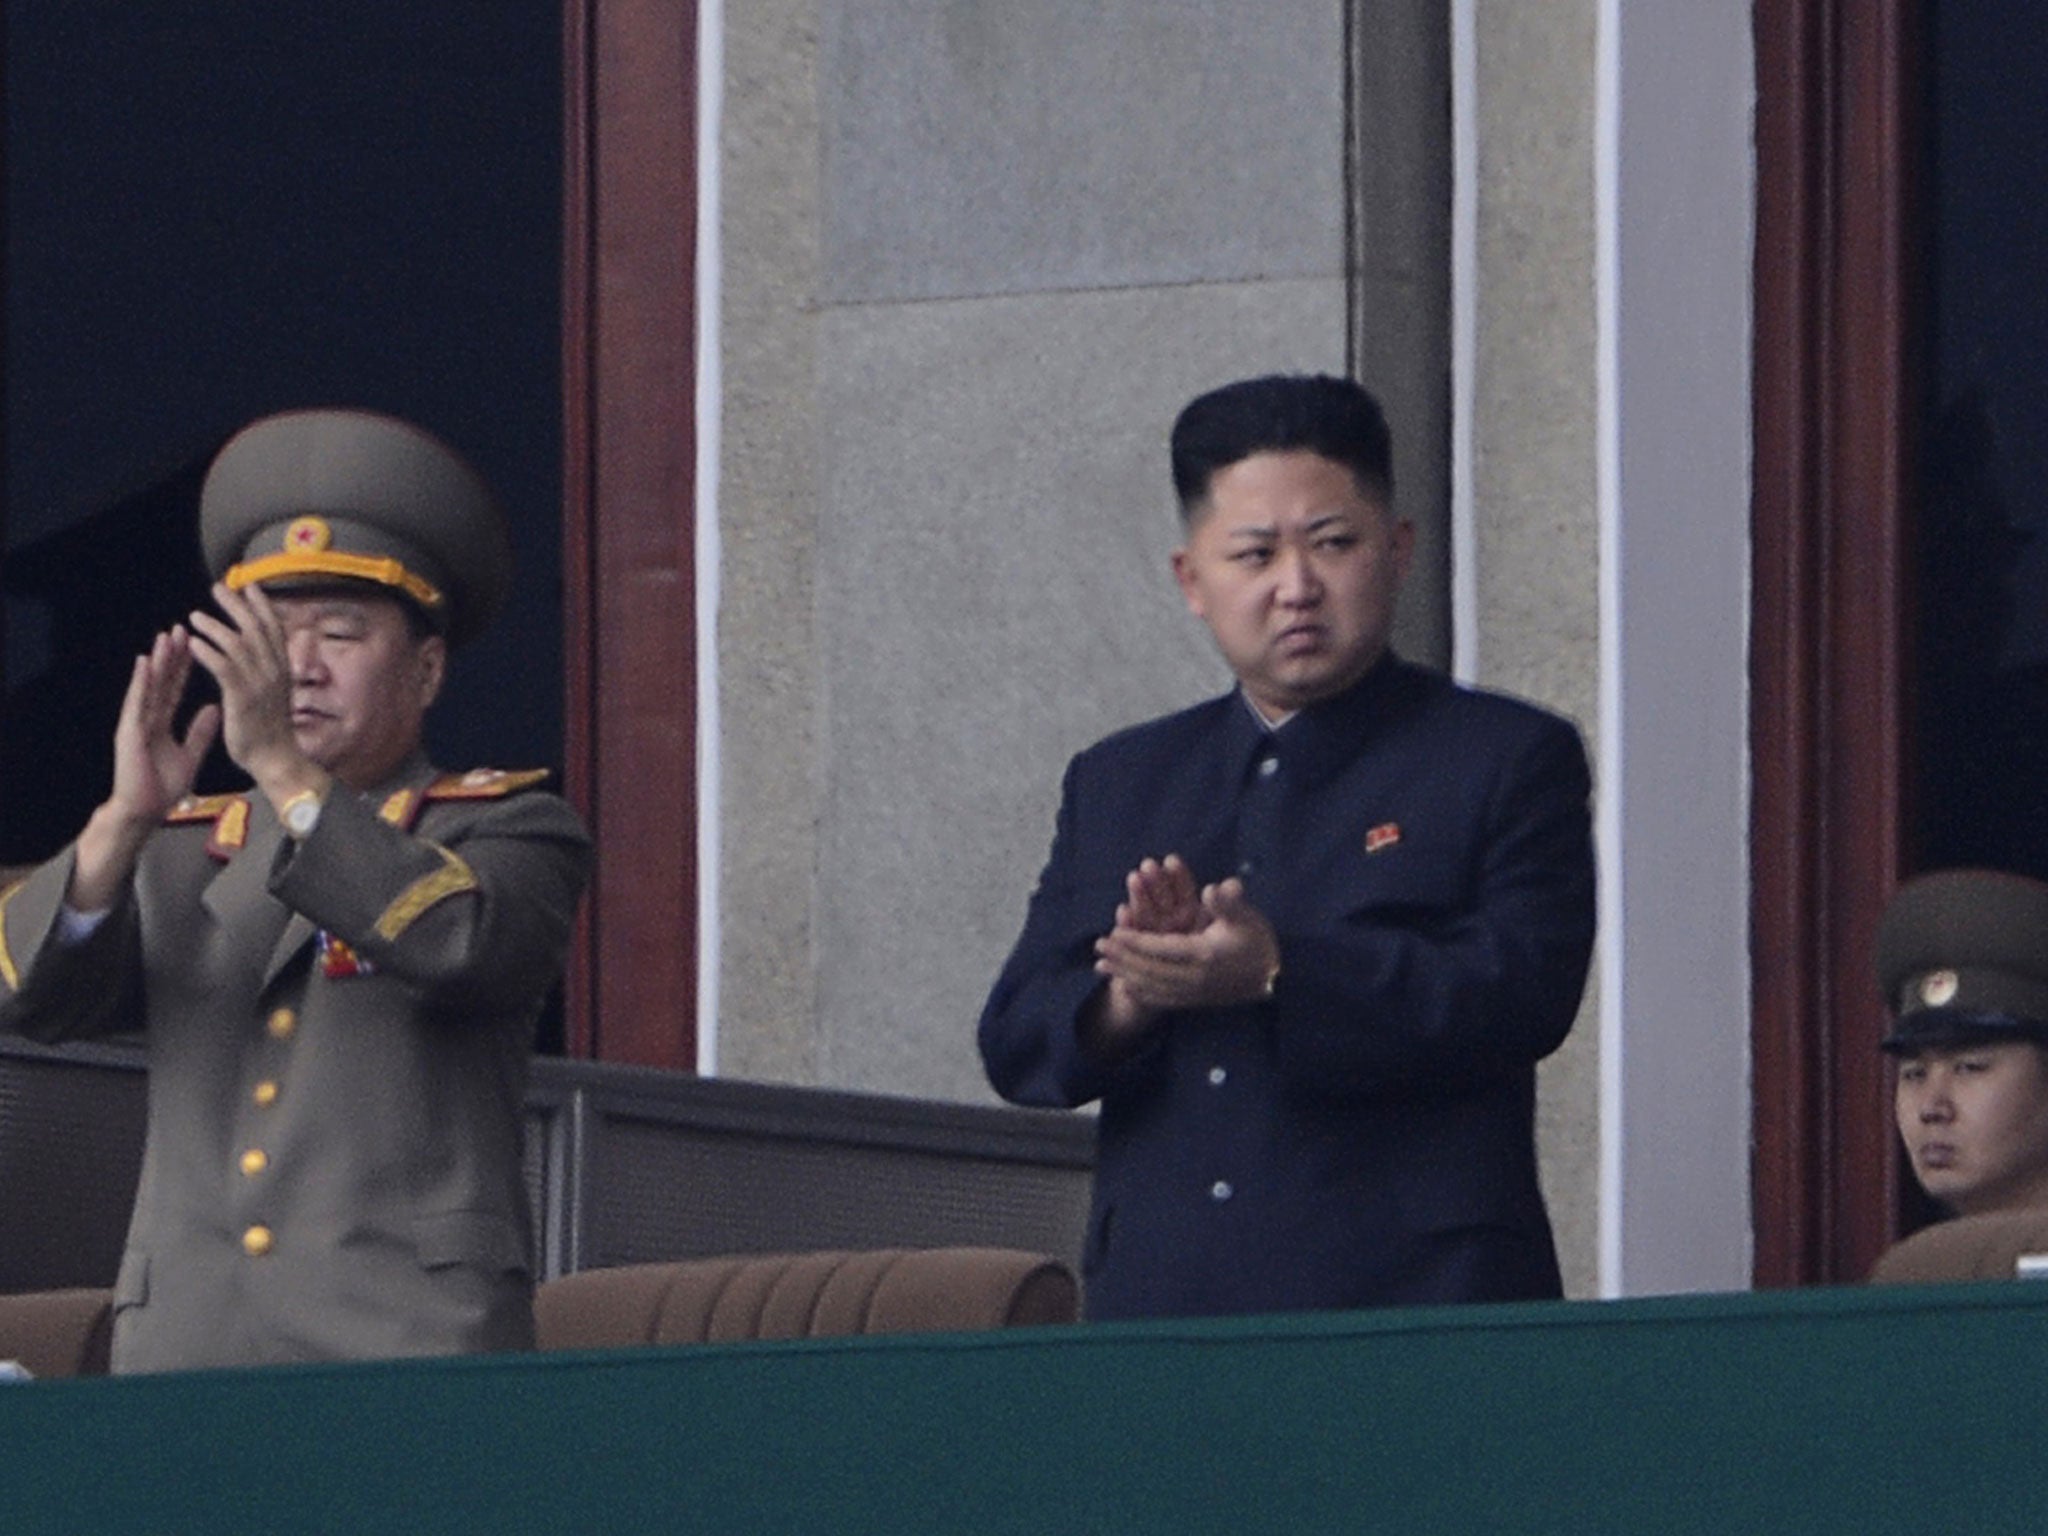 North Korean leader Kim Jong-Un (C) applauds during a official ceremony at a stadium in Pyongyang on April 14, 2012.